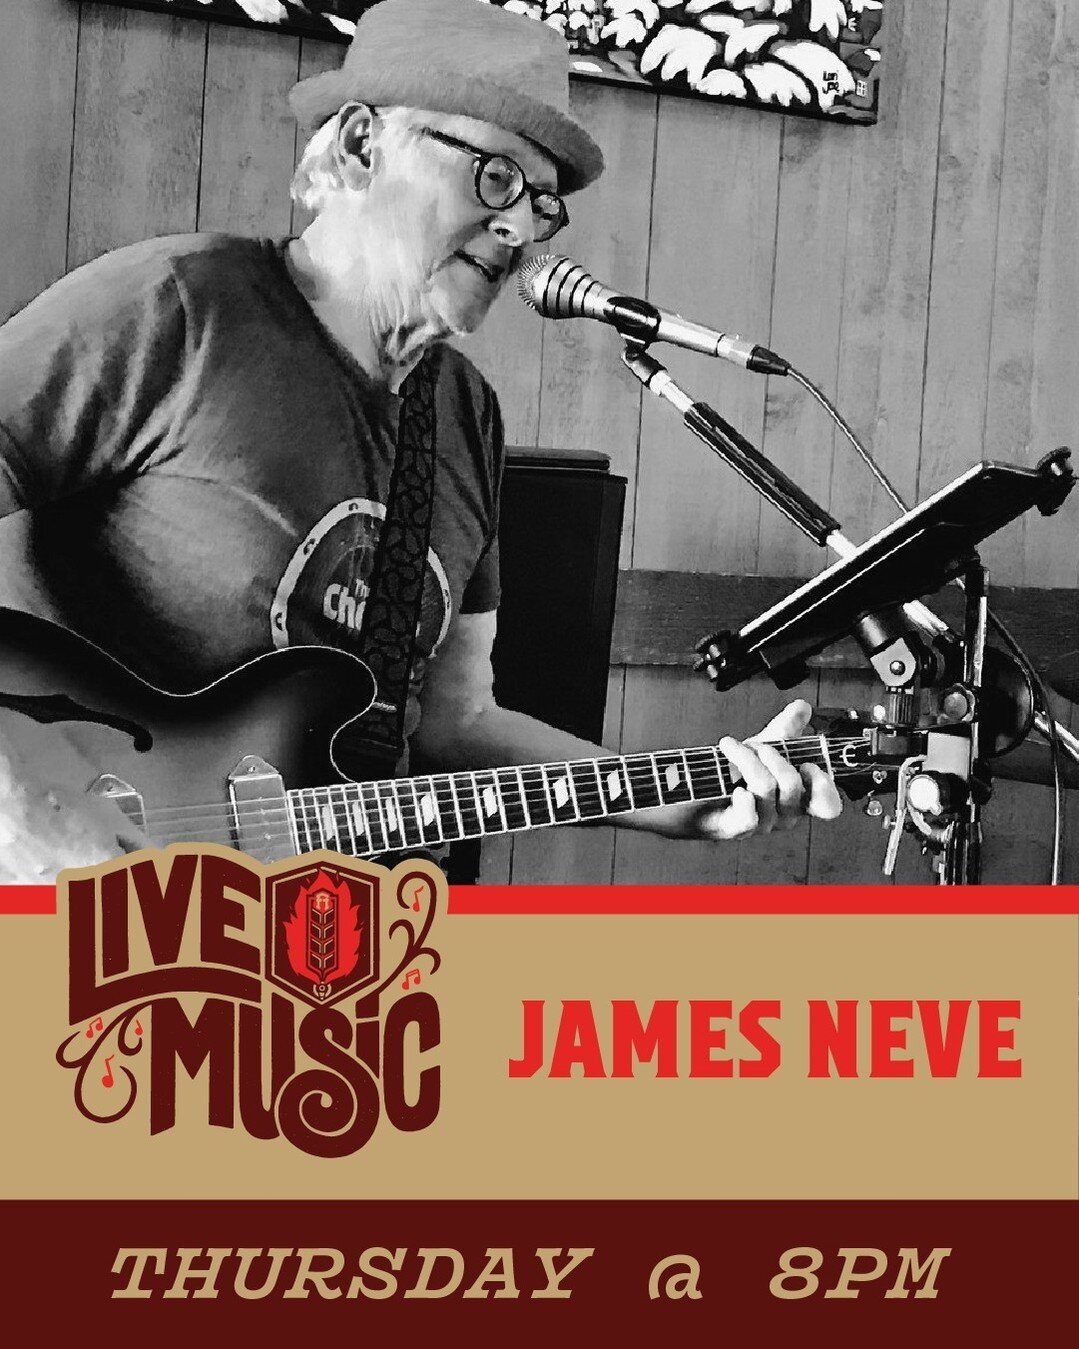 The Fortnight Showcase Presents : James Neve!⁠
⁠
Wycliffe BC's beloved singer-songwriter supreme JAMIE NEVE takes the stage at the Firehall Kitchen &amp; Tap this coming Thursday October 27th as the latest performer in the Fortnight Showcase concert 